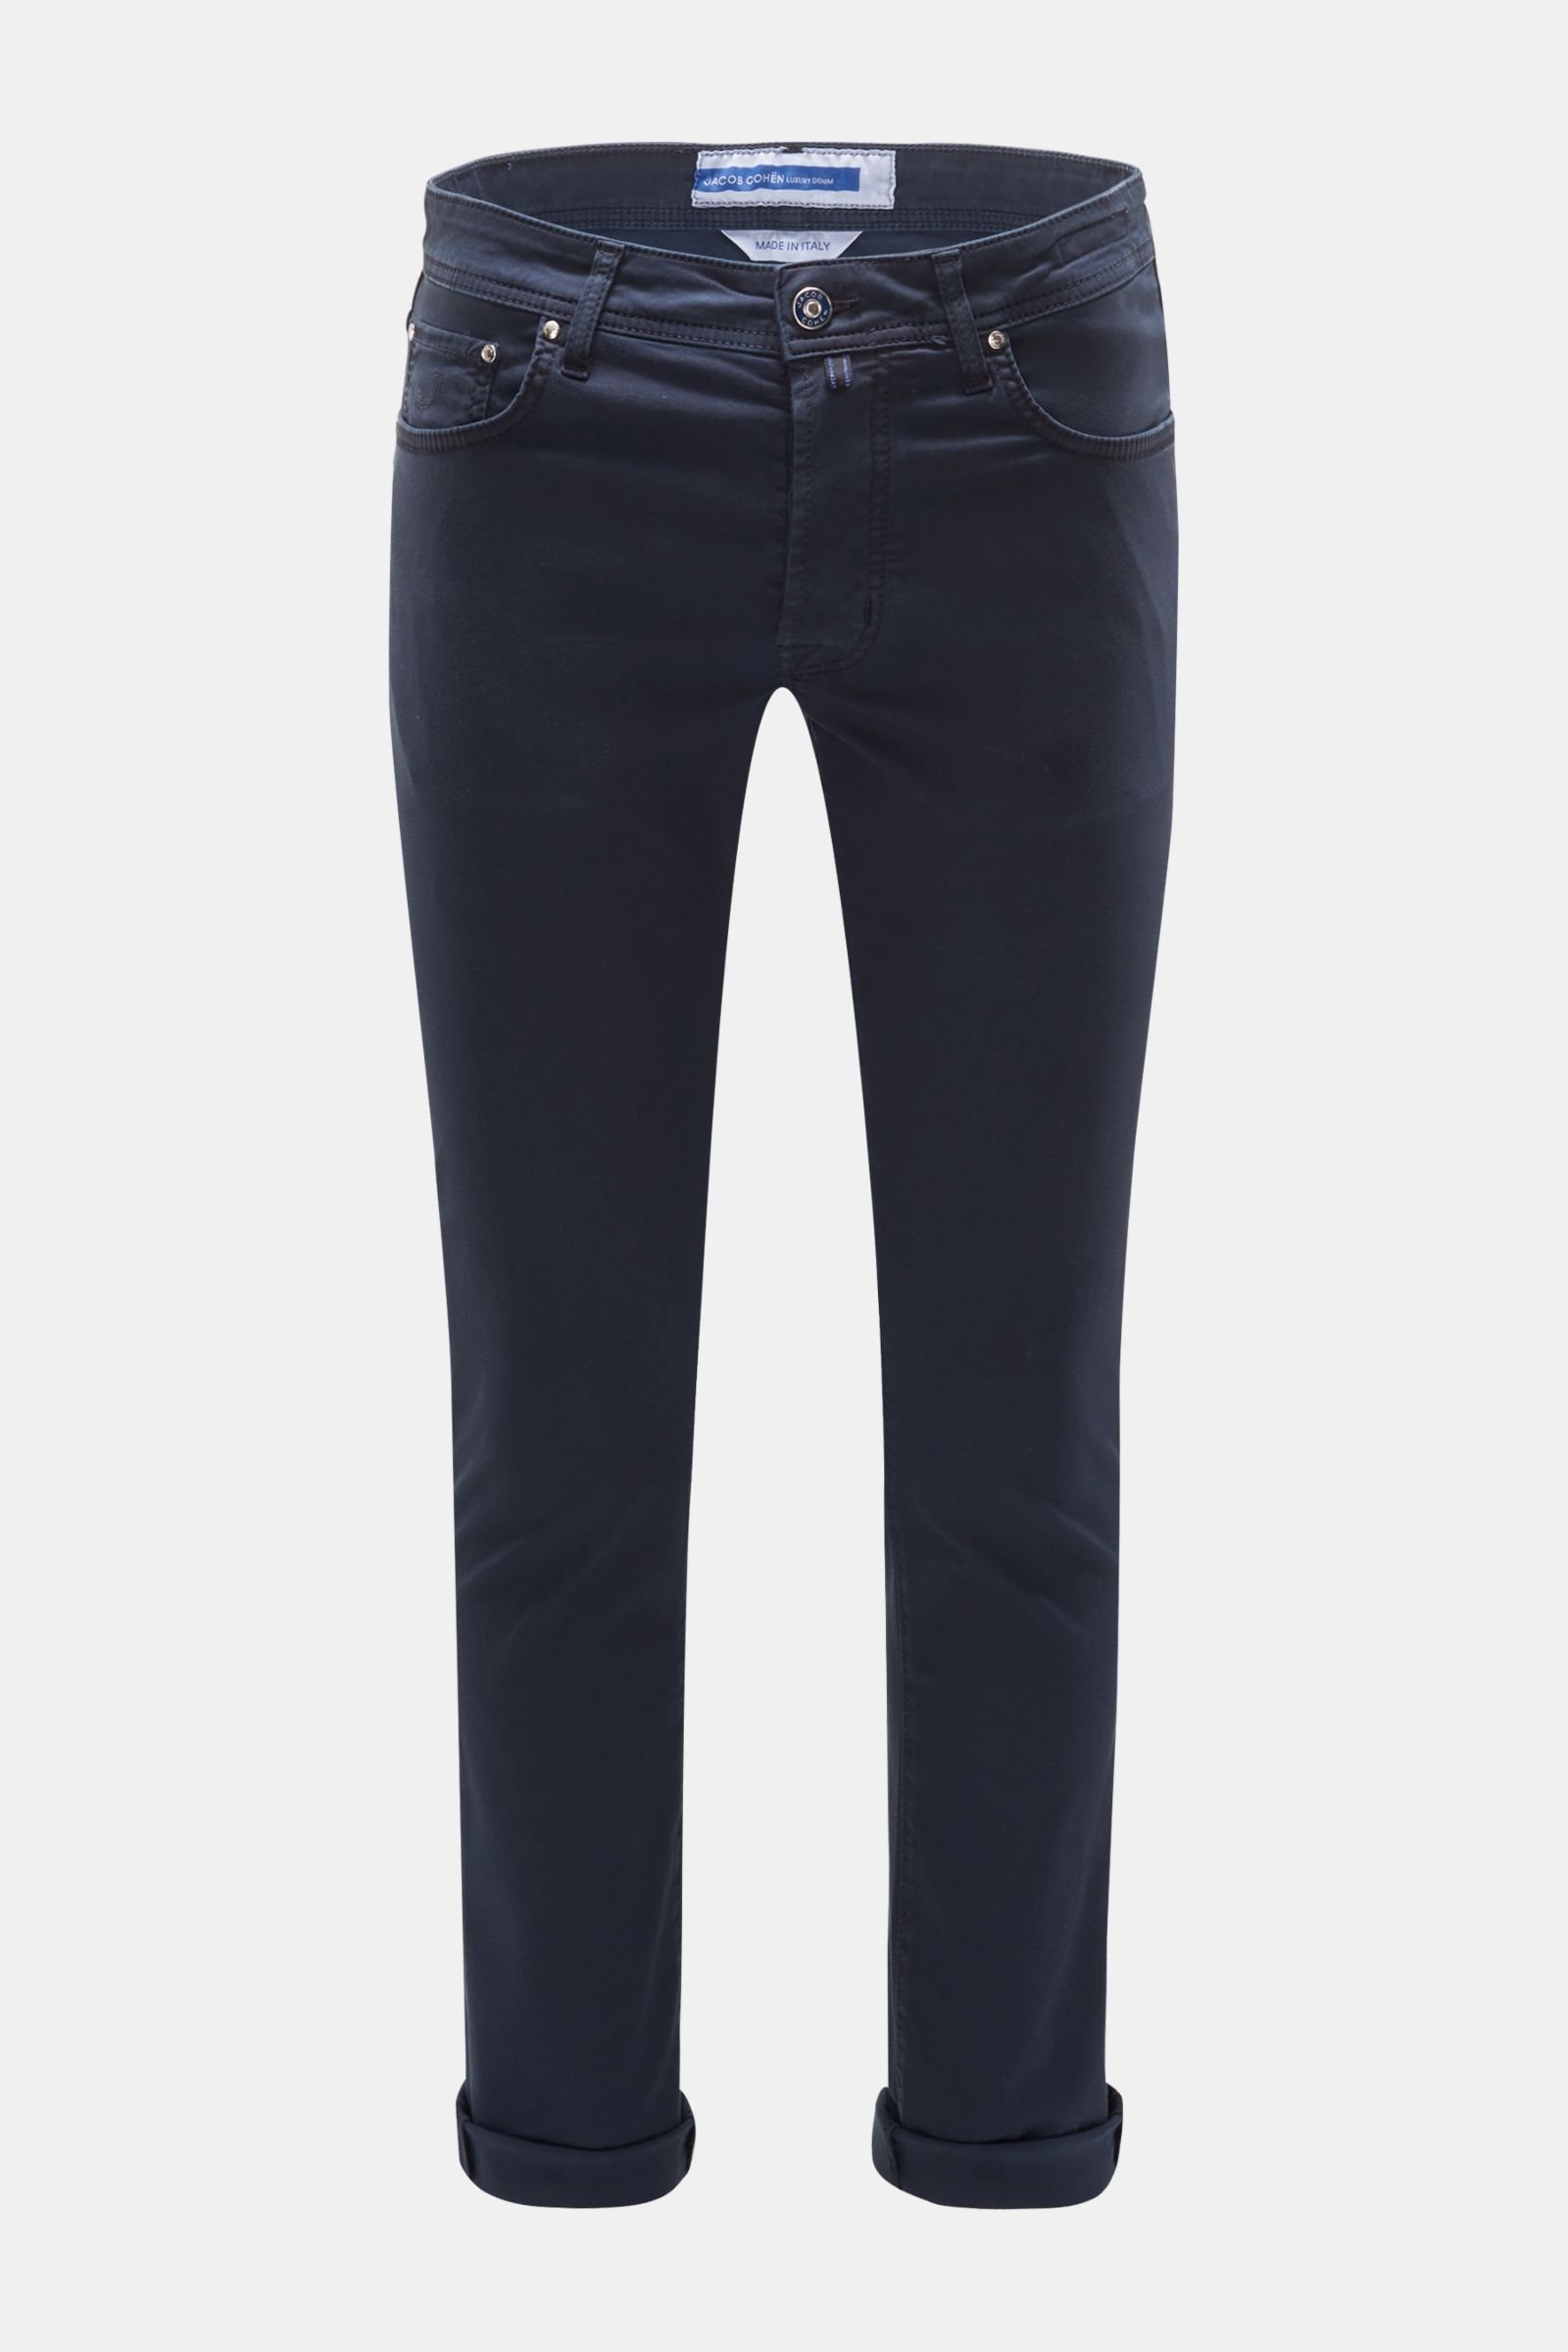 Trousers 'Bard' navy (previously J688)